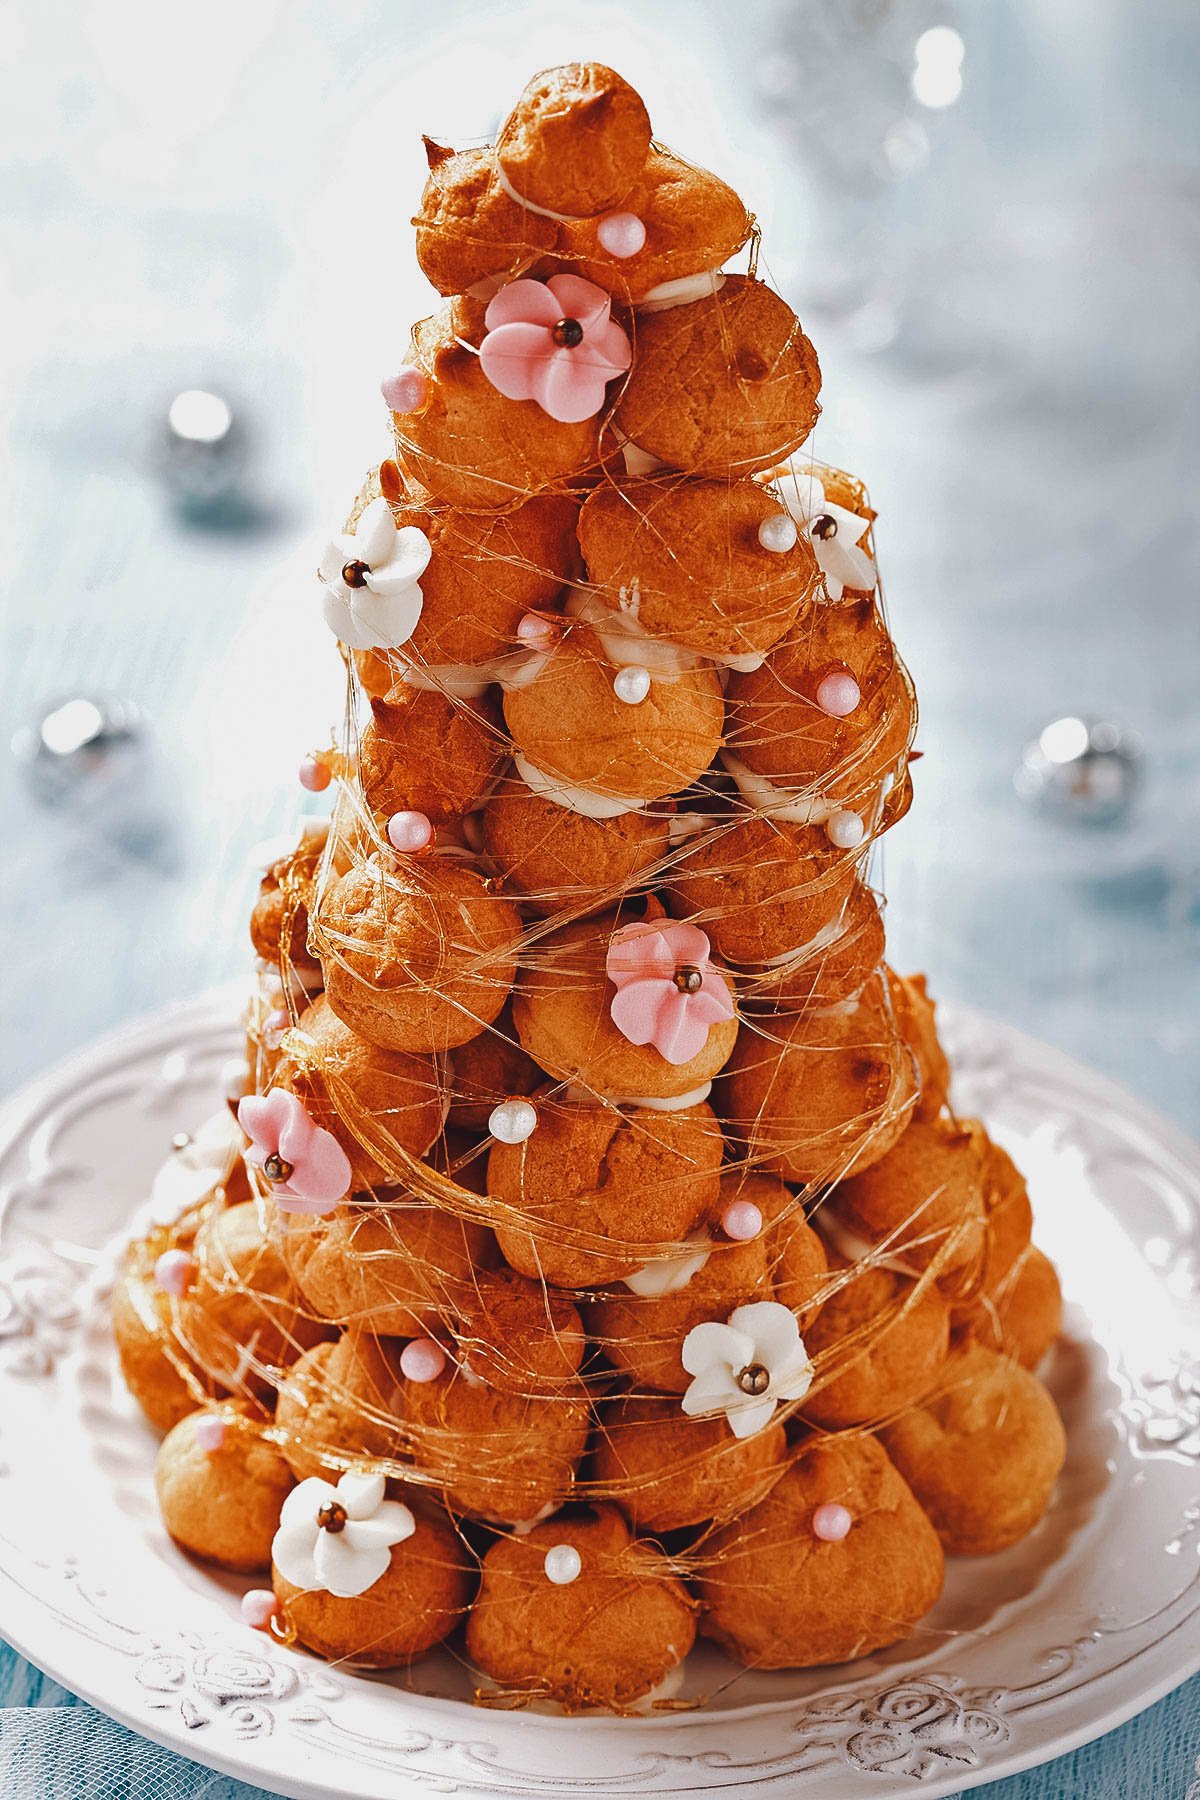 Croquembouche, a French cream puff tower